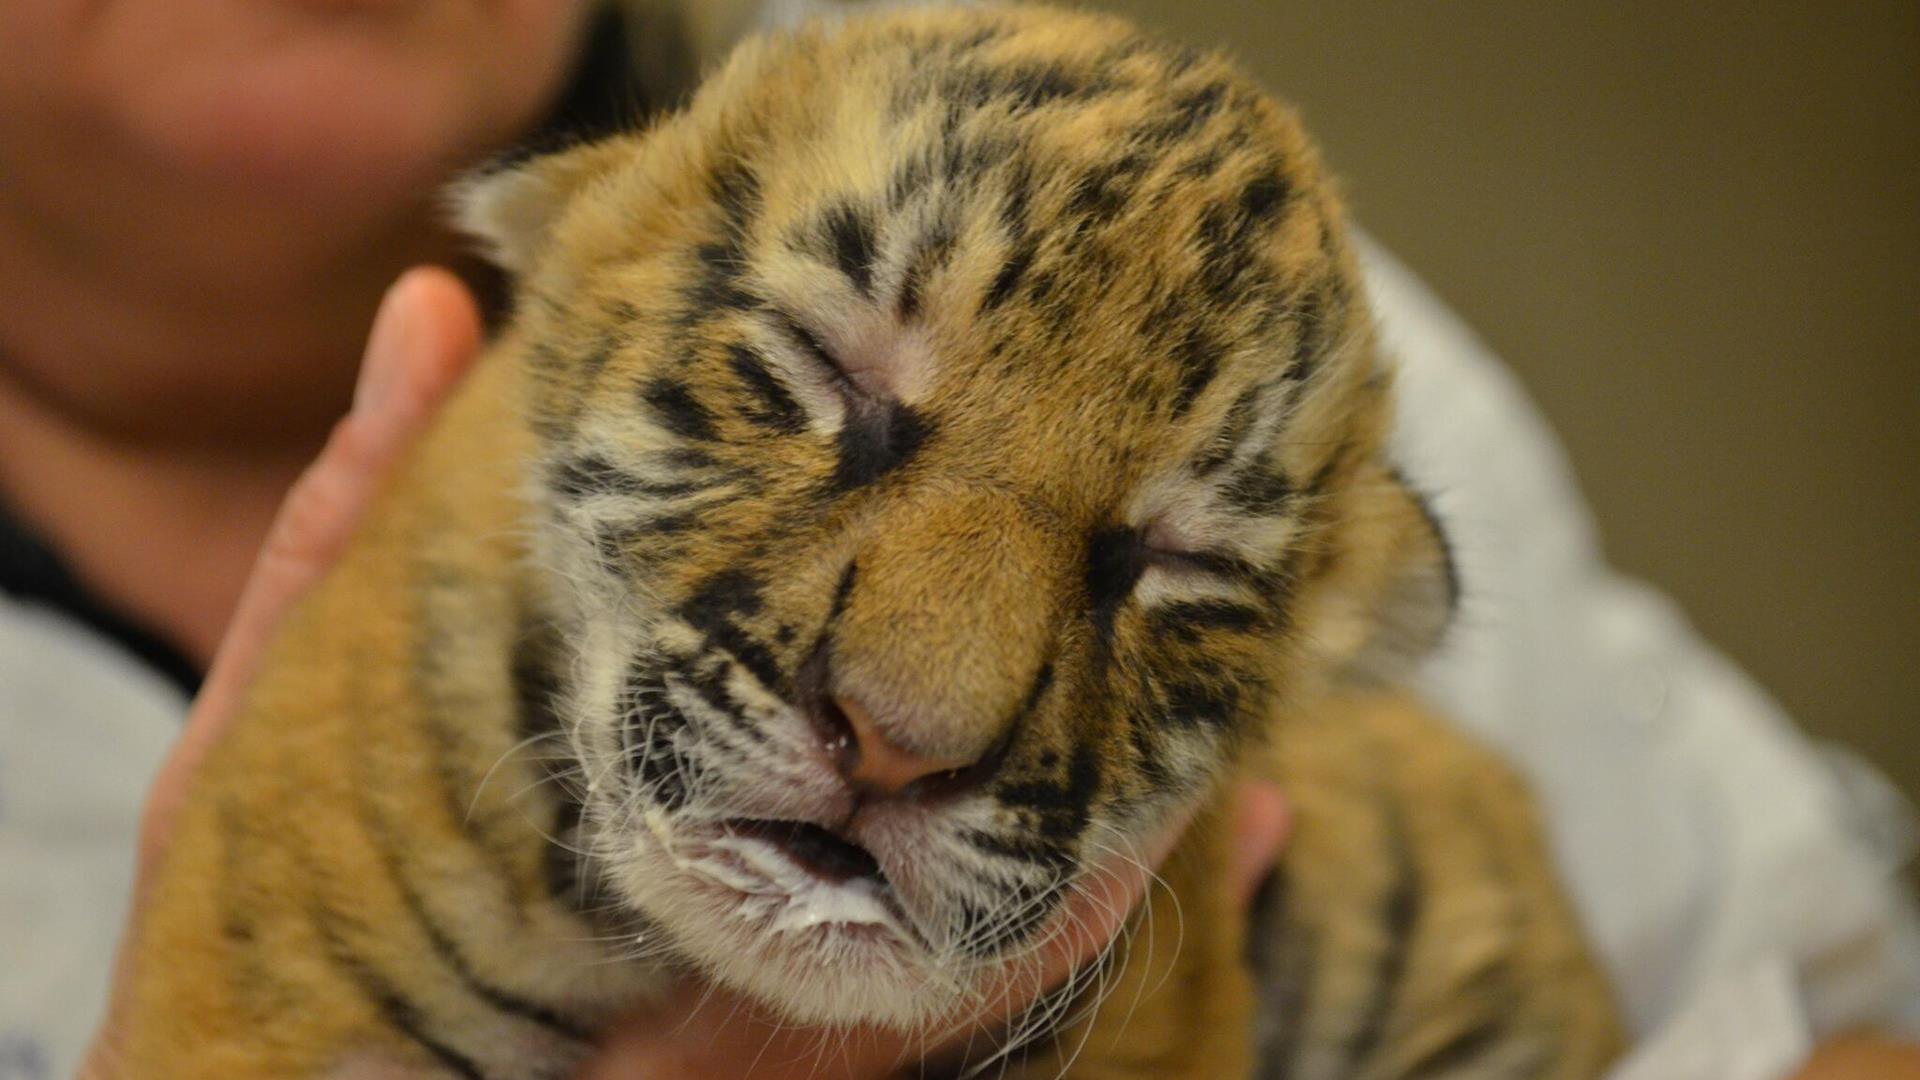 These newborn Malayan tiger cubs are the cutest thing you'll see today